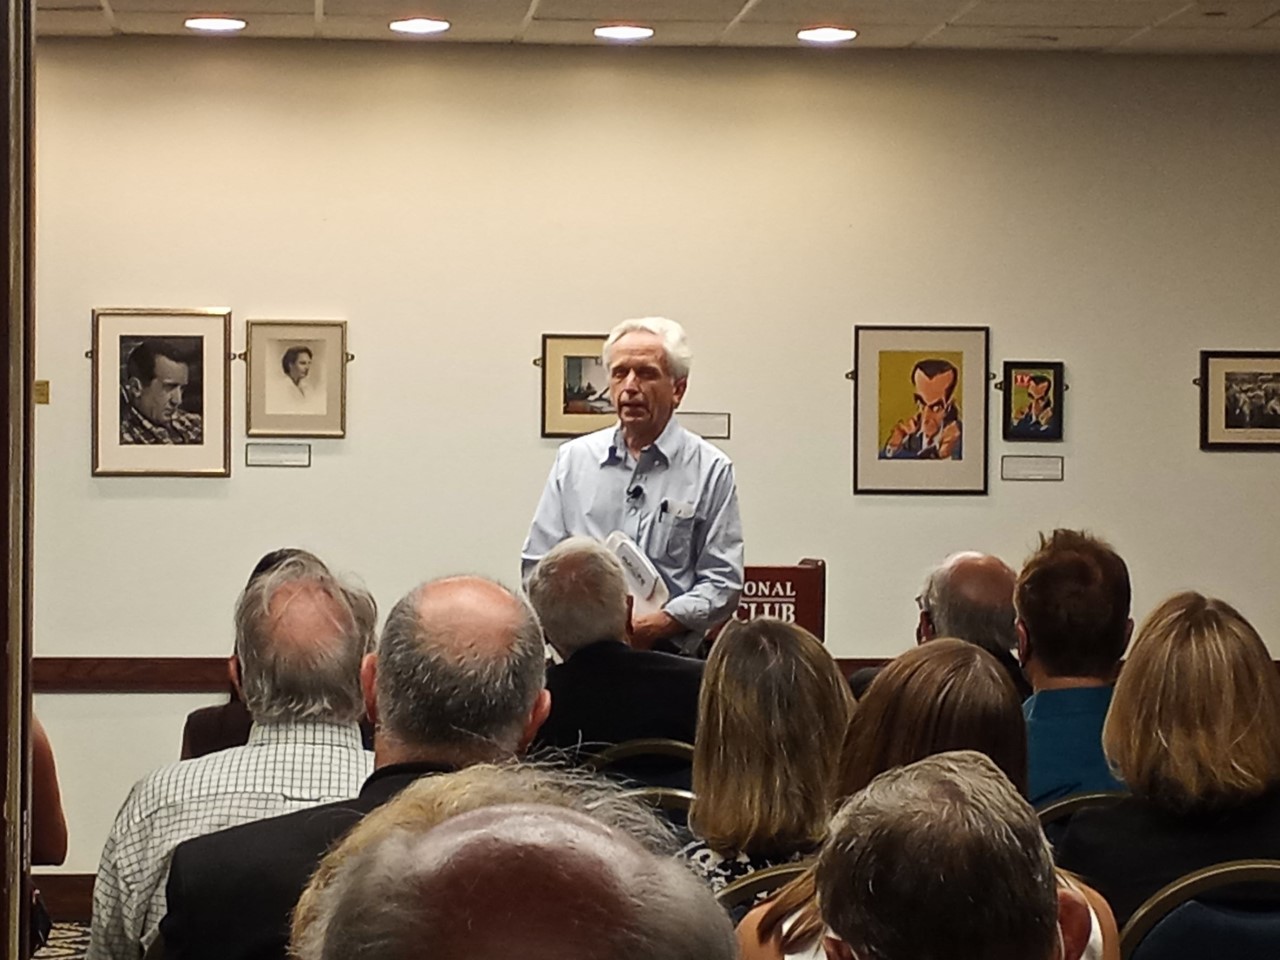 Casey Murrow discussed his father Edward R. Murrow's legendary career at a Sept. 14 Club event. Photo: Dan McCue